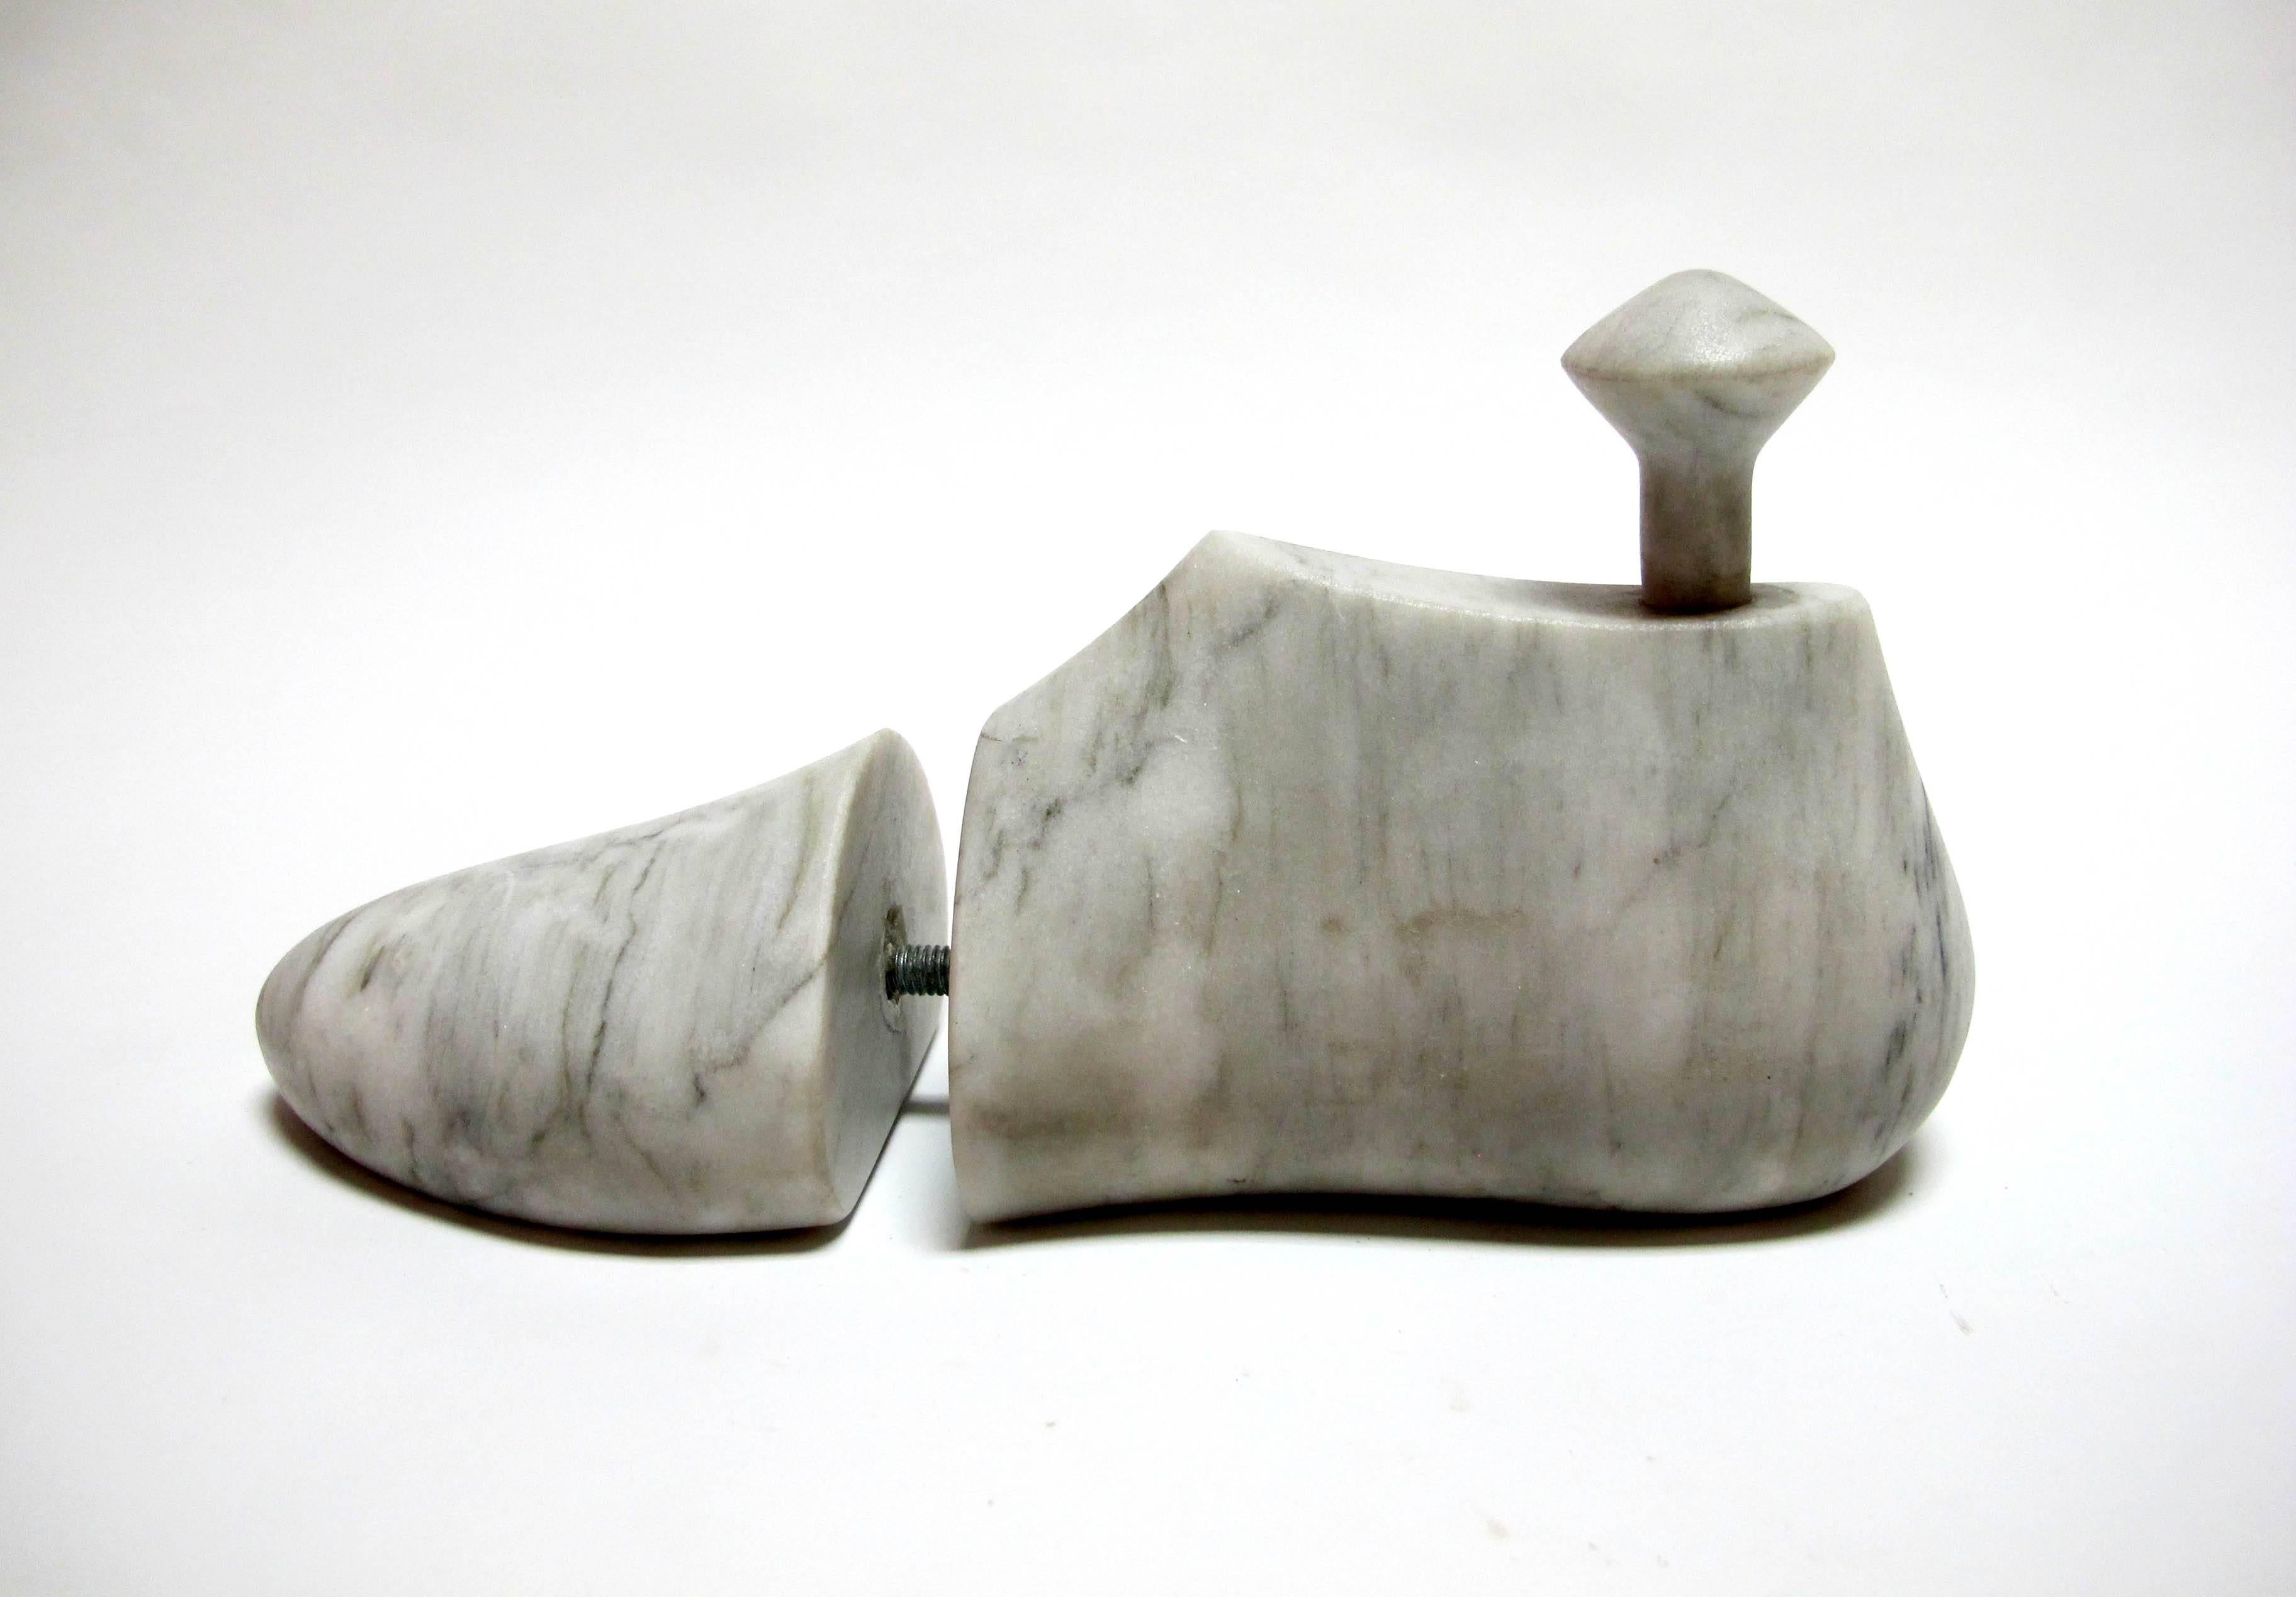 This is a gorgeous hand-carved white marble object The marble is polished and with an amazing tactile feel. The weight and the feeling of the polished marble is the best. 

This piece is celebrates our connection to natural materials and reminds us